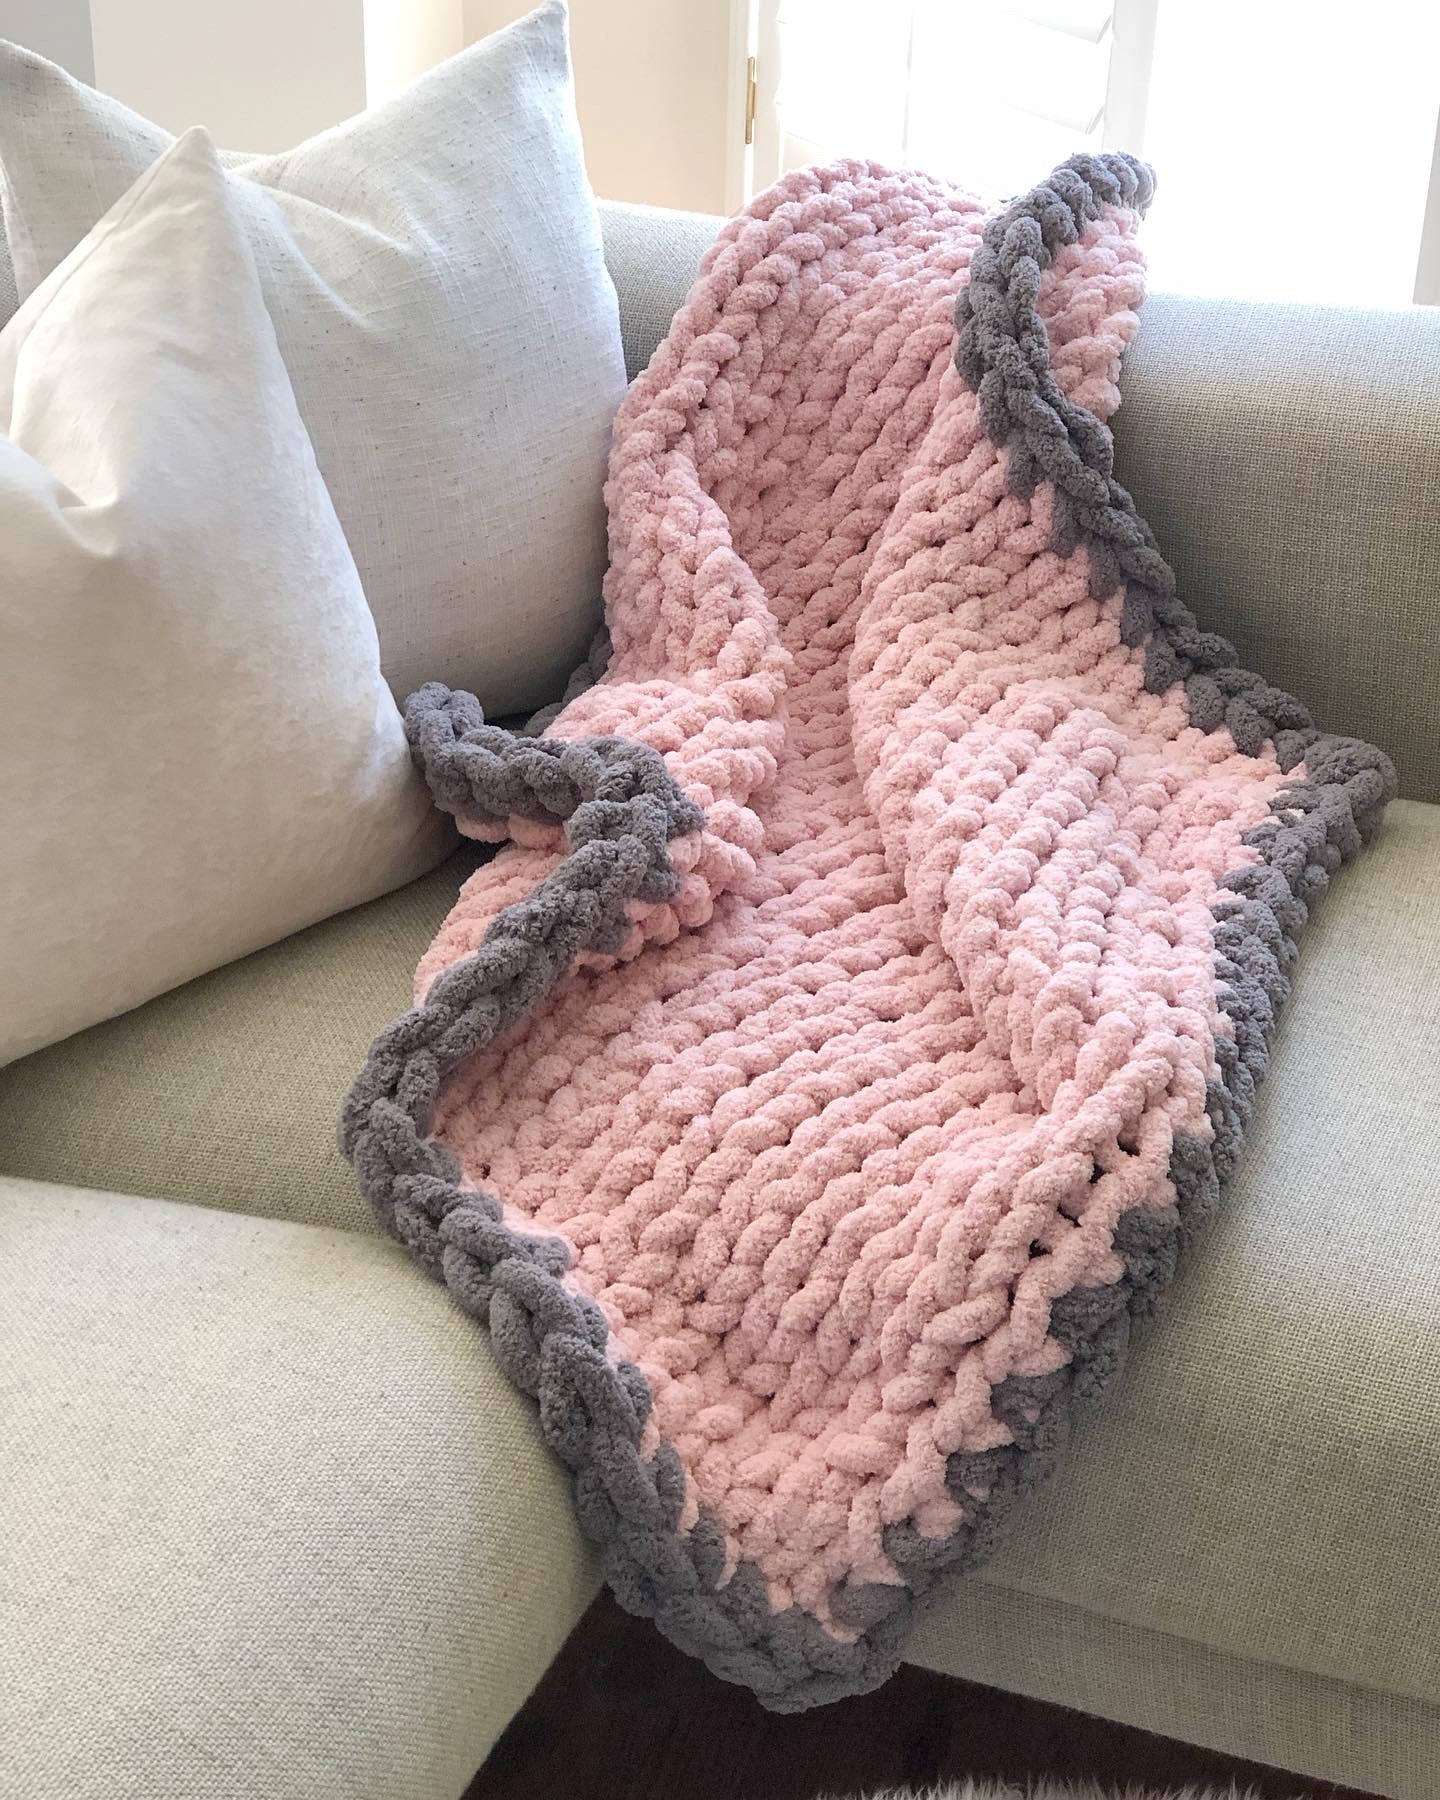 Healing Hand, Chunky Knit Baby Blankets - Light Pink with Dark Grey Edge